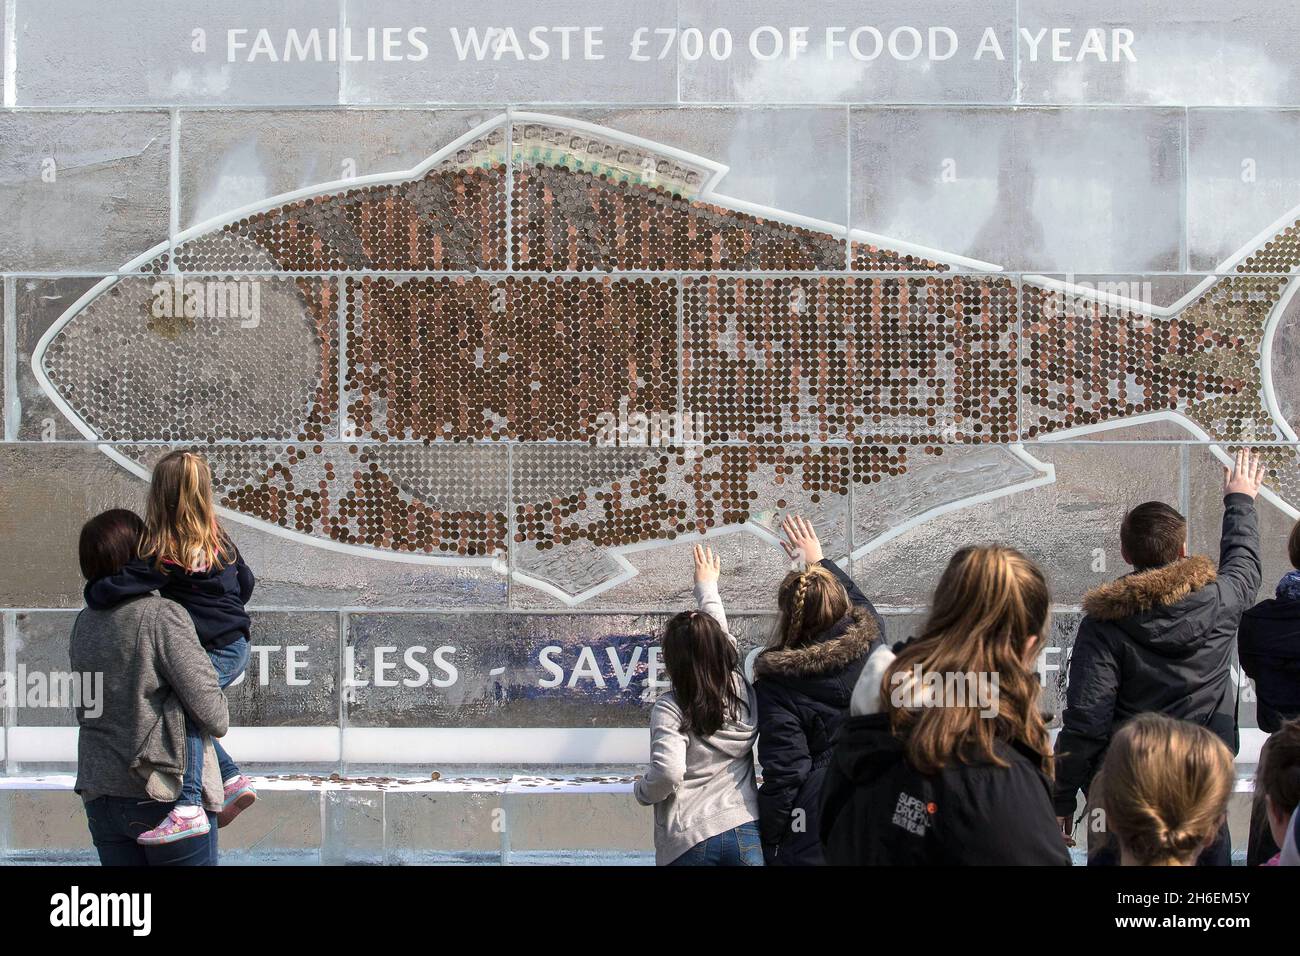 A 20-foot frozen billboard made entirely of ice and cash was unveiled today to urge Brits to save money and reduce household waste by using their freezer more. The billboard containing Ã‚Â£700 in coins and notes (the amount the average household wastes every year on food) was created by iFreeze, iSave and follows research revealing that two million Brits keep money in the freezer but throw away 850,000 tonnes of good food every year. Stock Photo